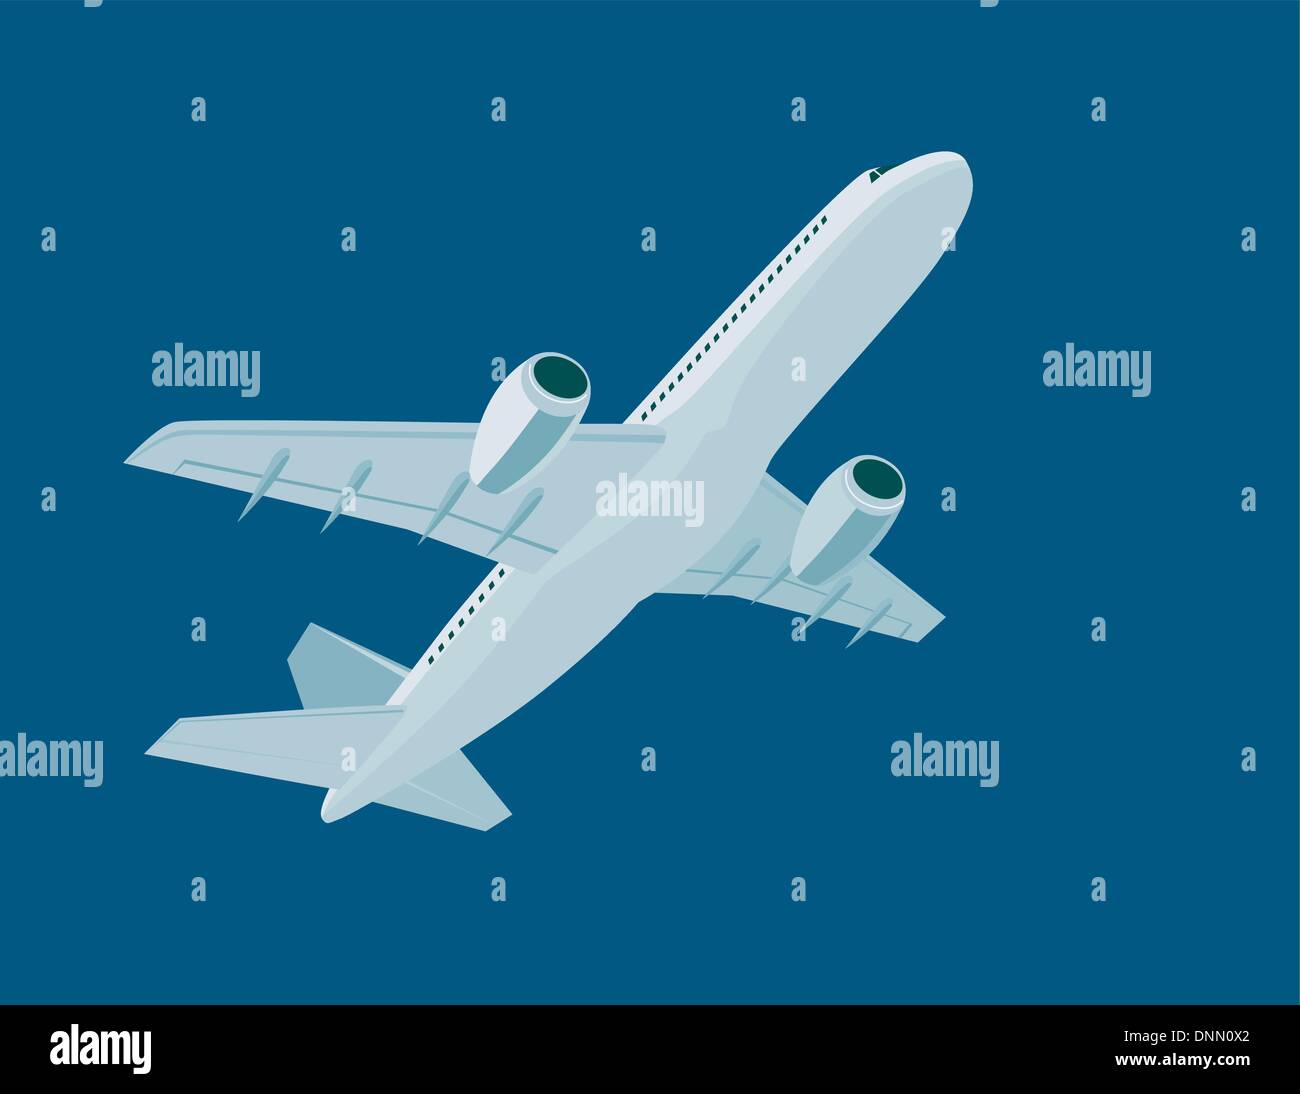 Illustration of a commercial jet plane airliner on isolated background Stock Vector